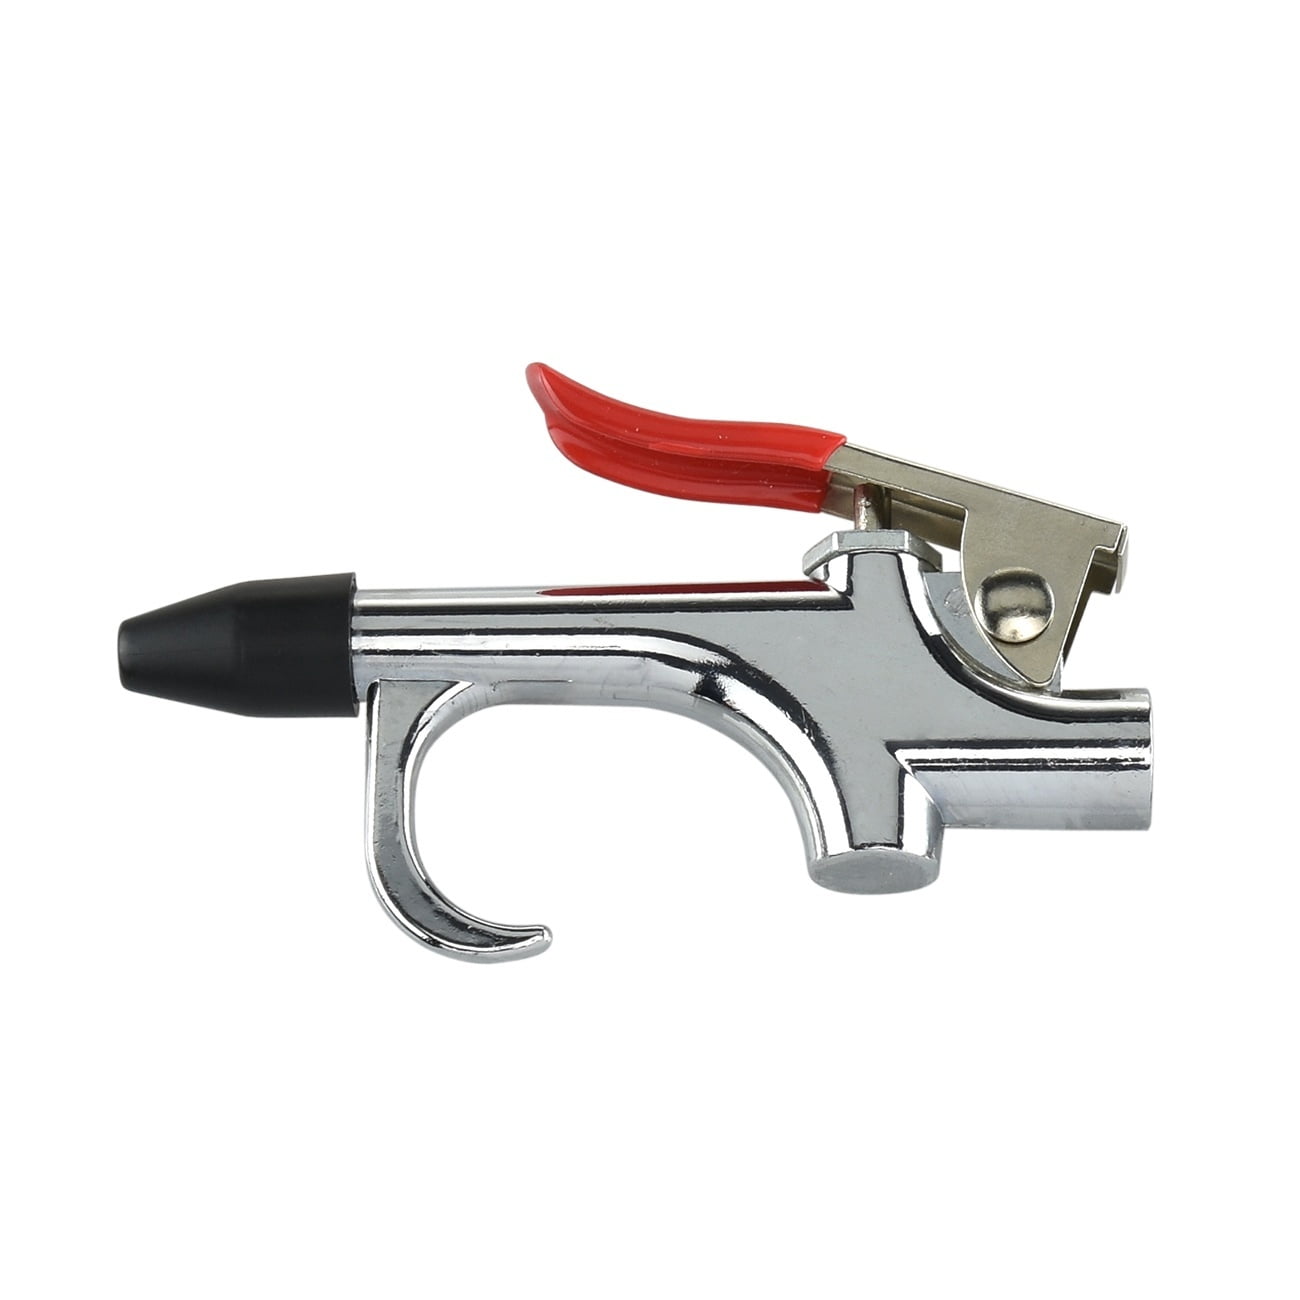 Threaded for Acc. Blow Gun Safety Lever Campbell Hausfield Coated Trigger